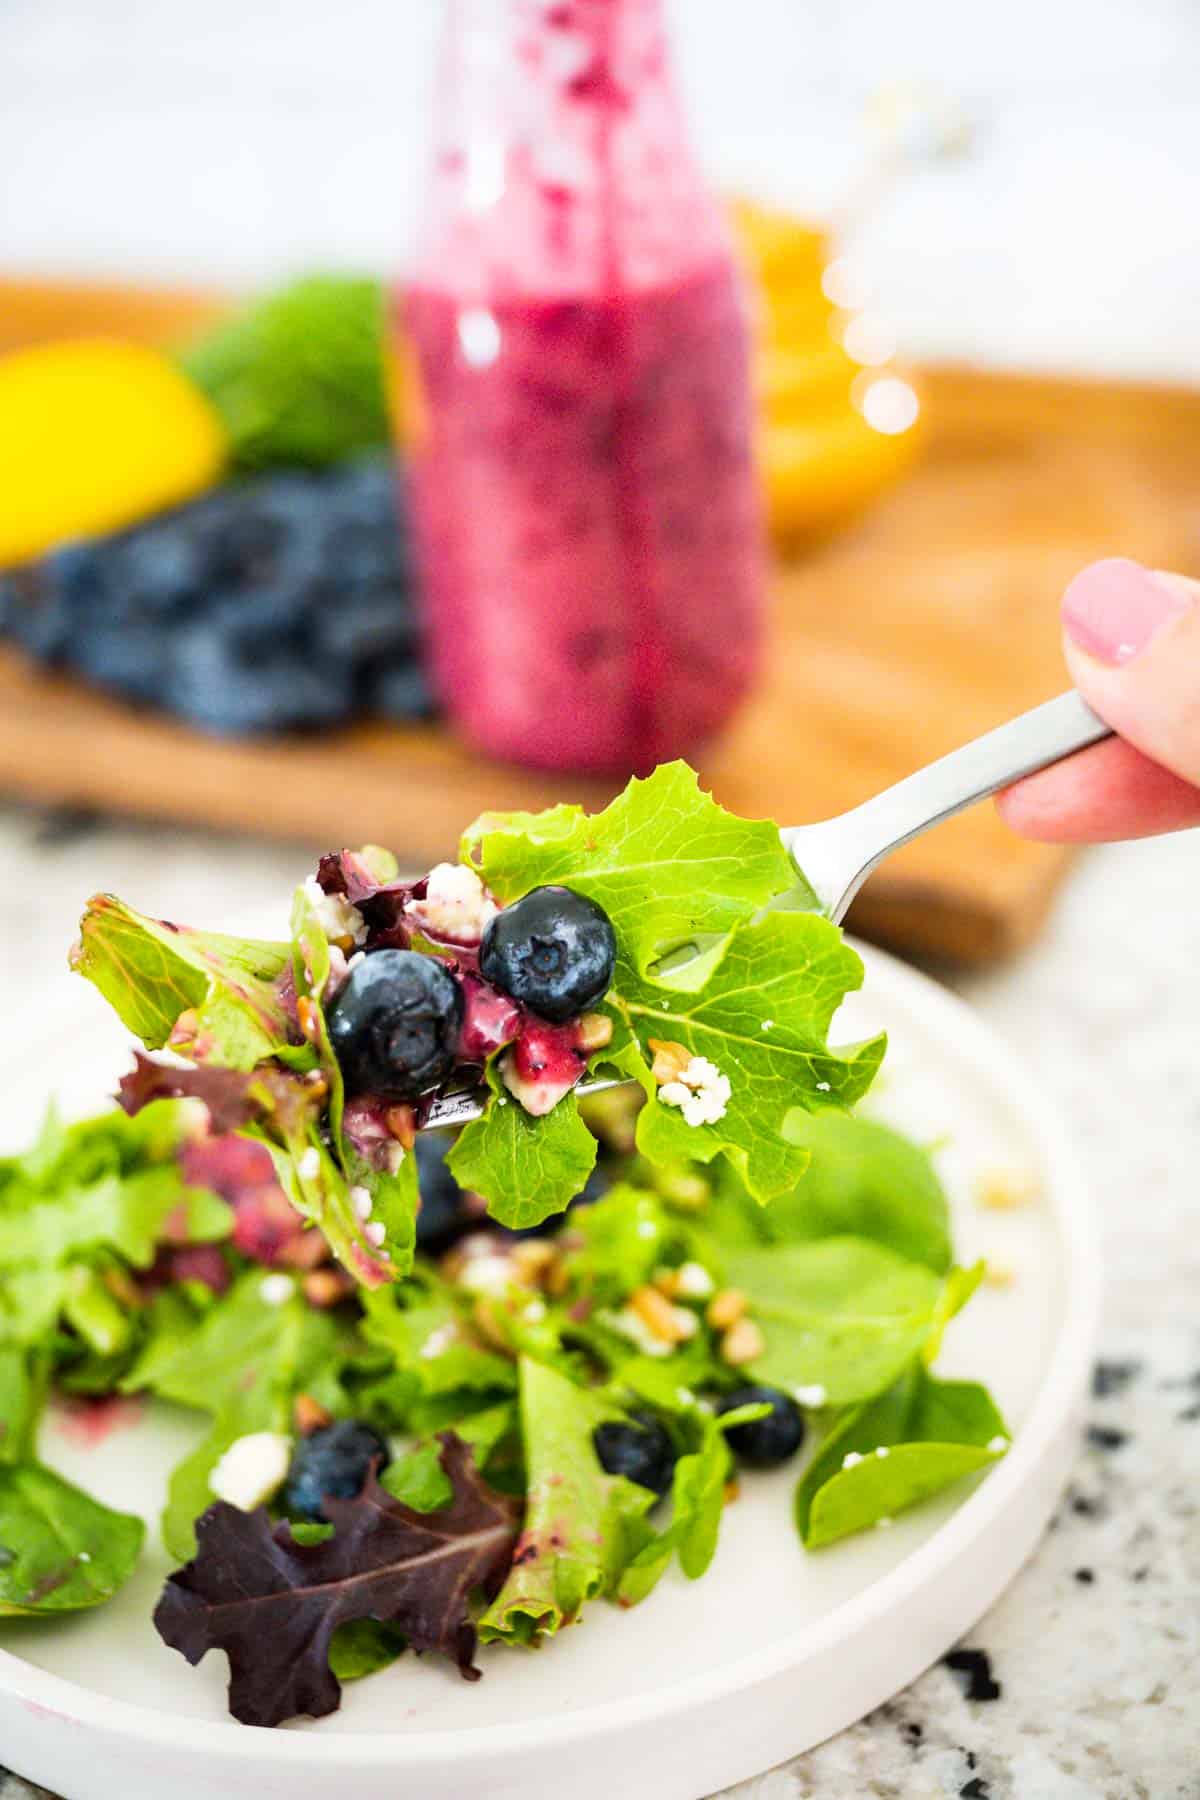 A for full of blueberry feta salad with a drizzle of blueberry vinaigrette dressing.